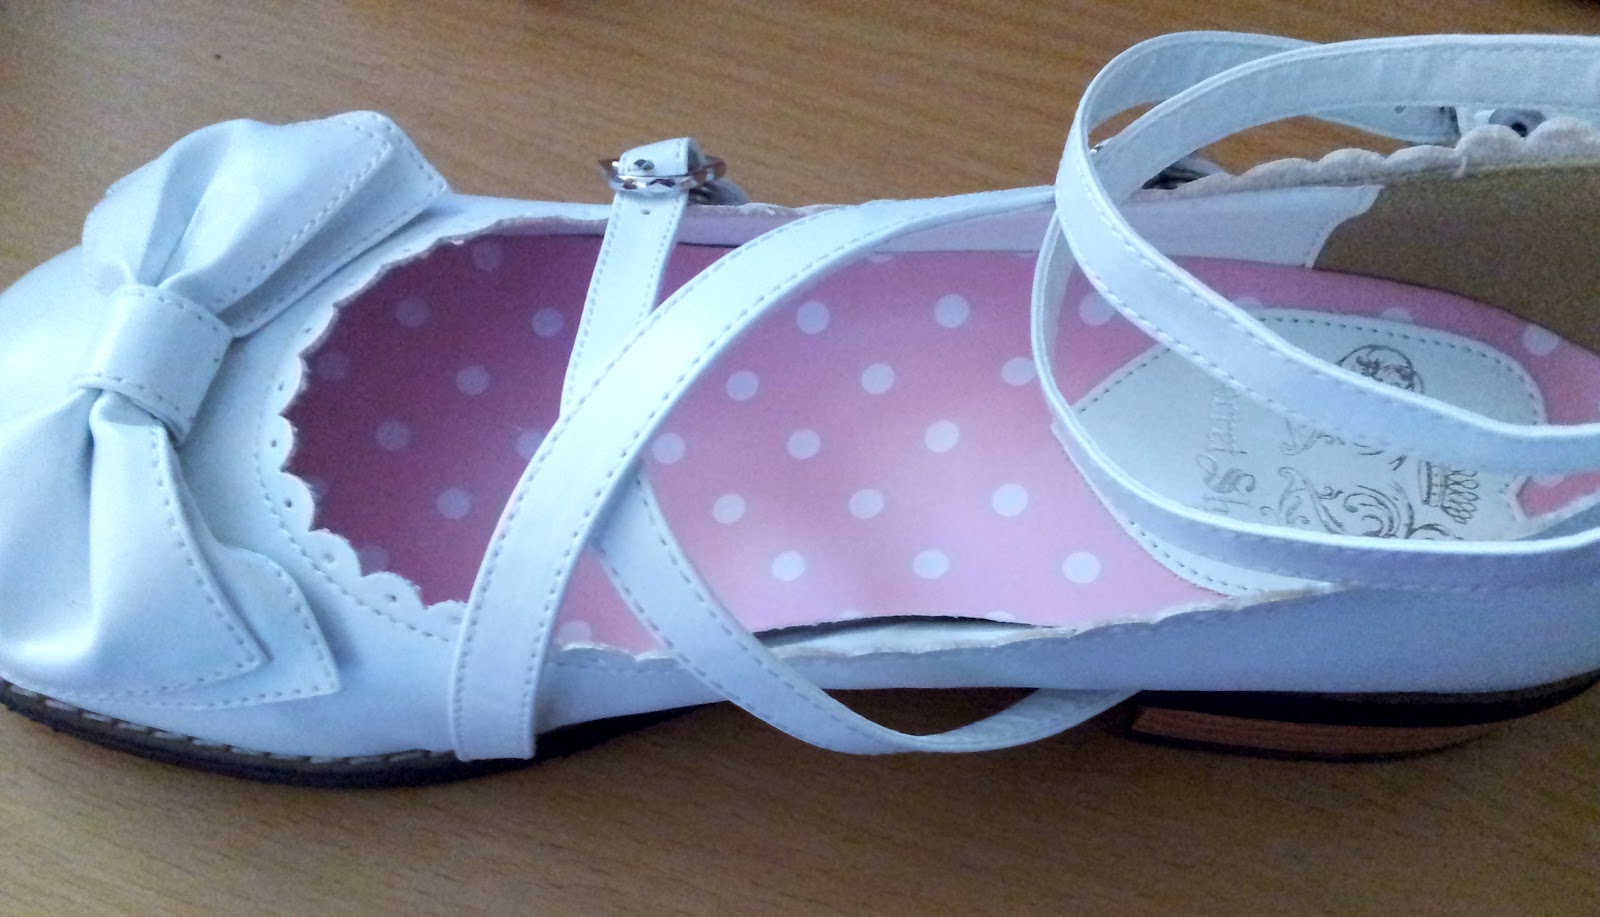 Review: Tea Party Shoes + another purchase